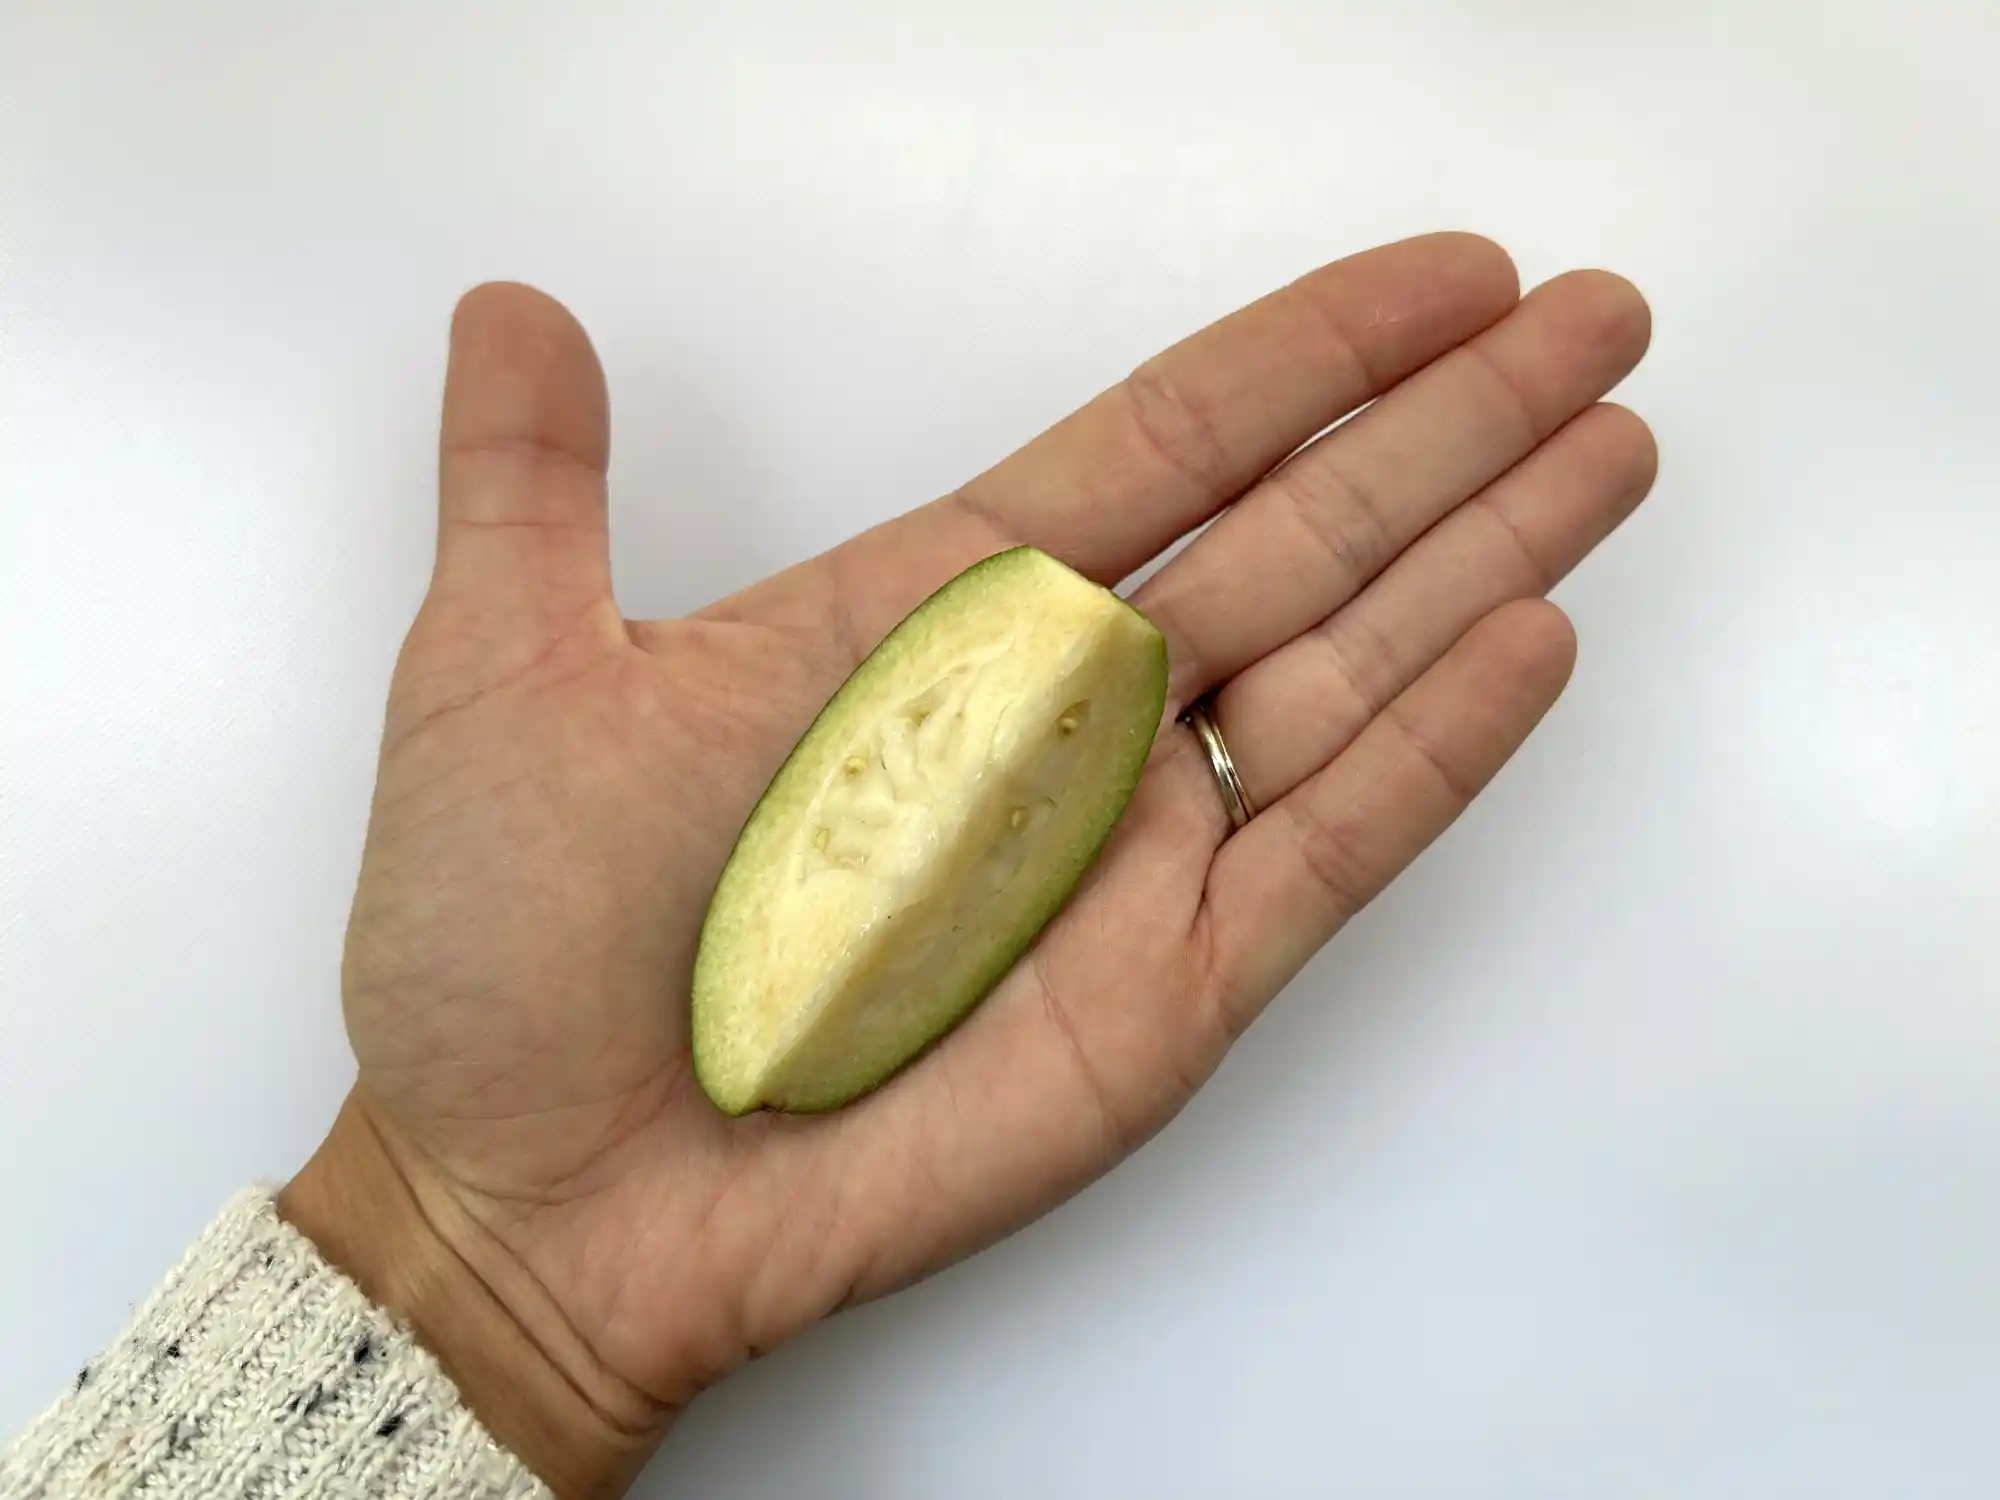 a photograph of a hand holding a large wedge of ripe feijoa with the skin still on